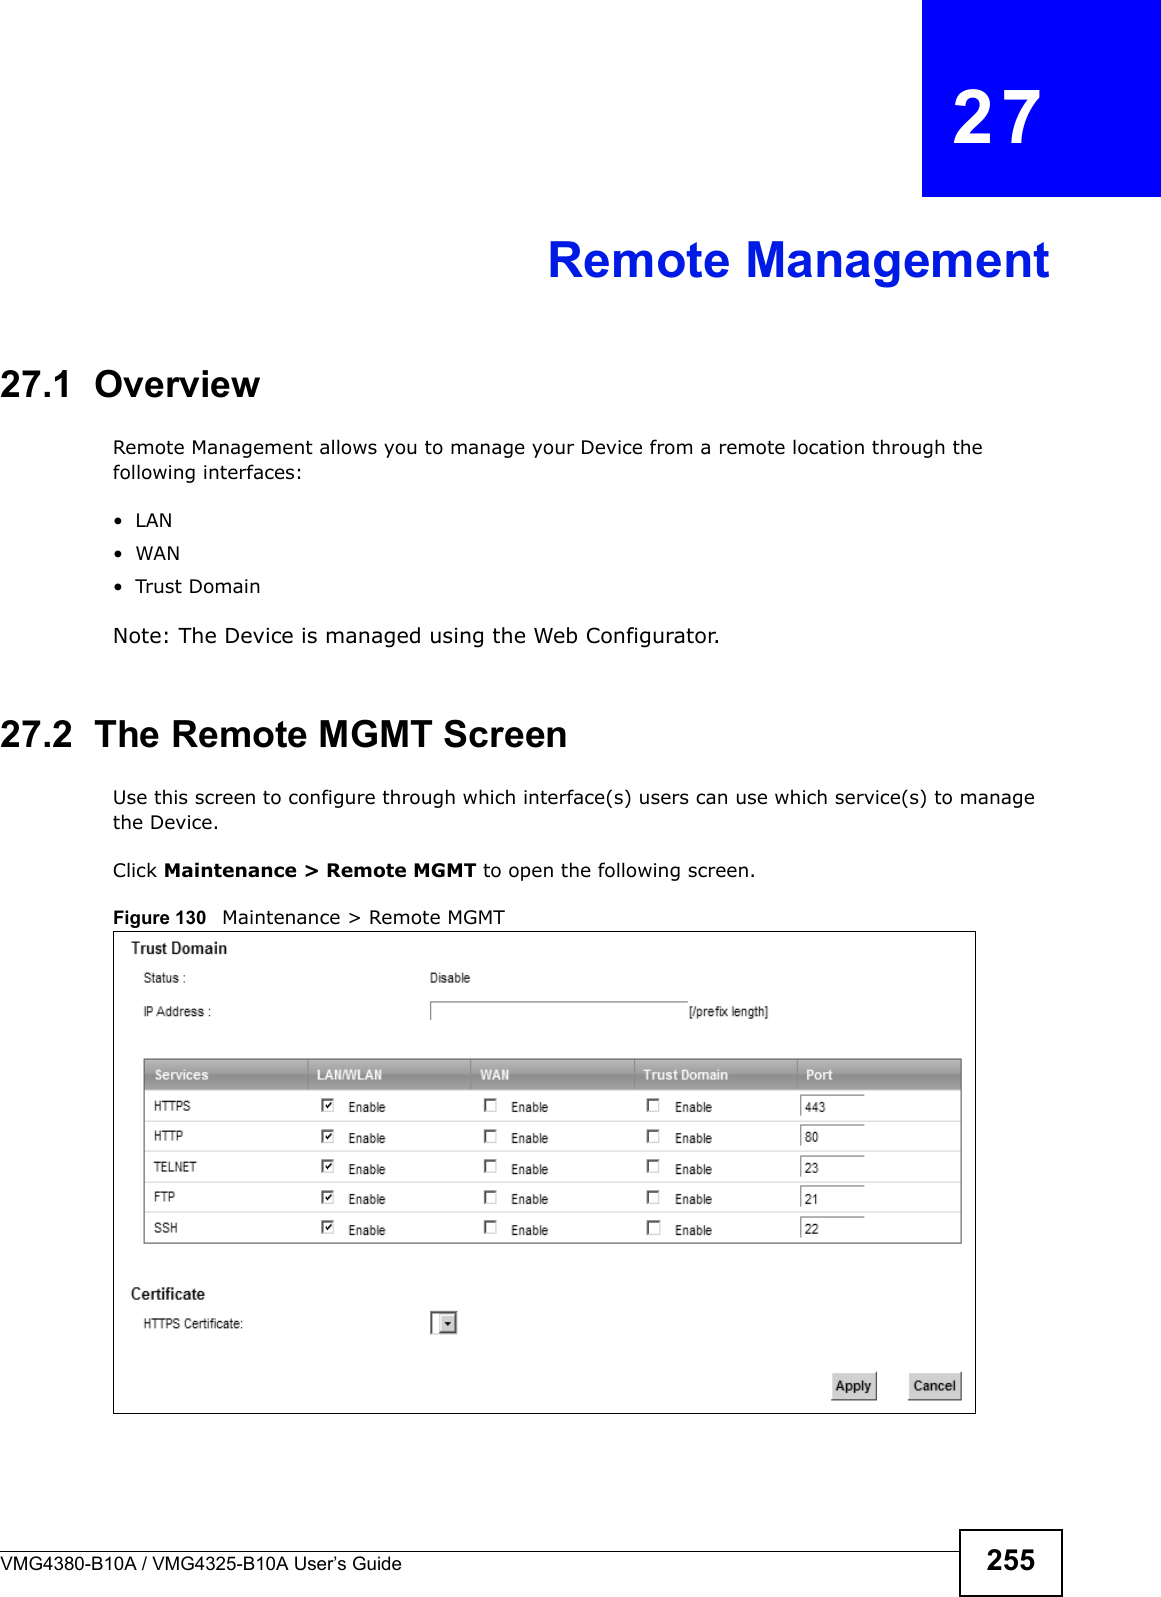 VMG4380-B10A / VMG4325-B10A User’s Guide 255CHAPTER  27Remote Management27.1  OverviewRemote Management allows you to manage your Device from a remote location through the following interfaces:• LAN• WAN• Trust DomainNote: The Device is managed using the Web Configurator.27.2  The Remote MGMT ScreenUse this screen to configure through which interface(s) users can use which service(s) to manage the Device.Click Maintenance &gt; Remote MGMT to open the following screen. Figure 130  Maintenance &gt; Remote MGMT 